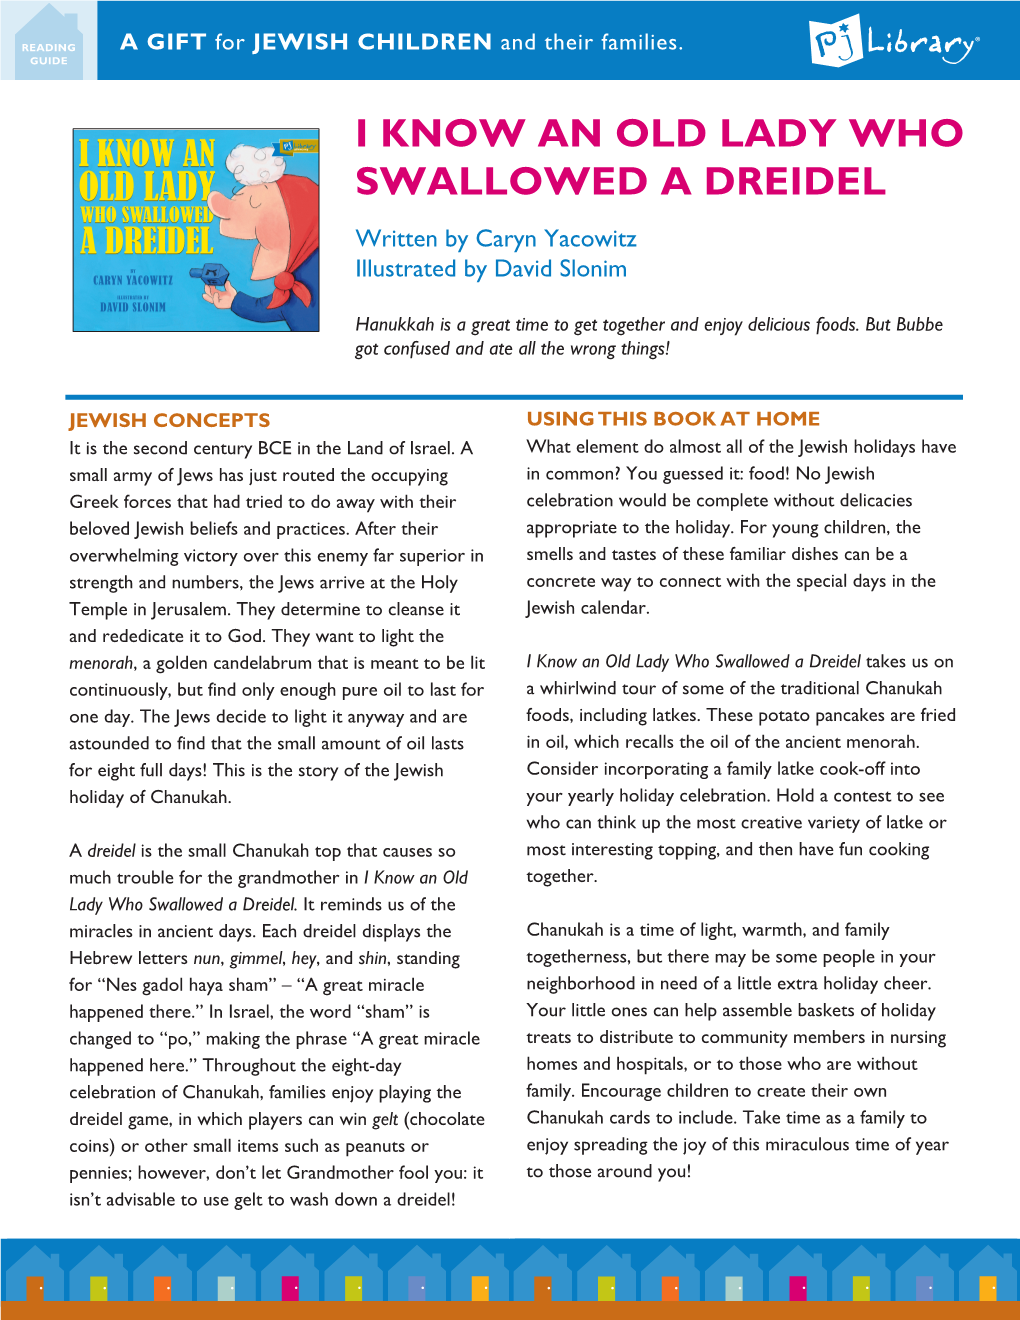 I KNOW an OLD LADY WHO SWALLOWED a DREIDEL Written by Caryn Yacowitz Illustrated by David Slonim